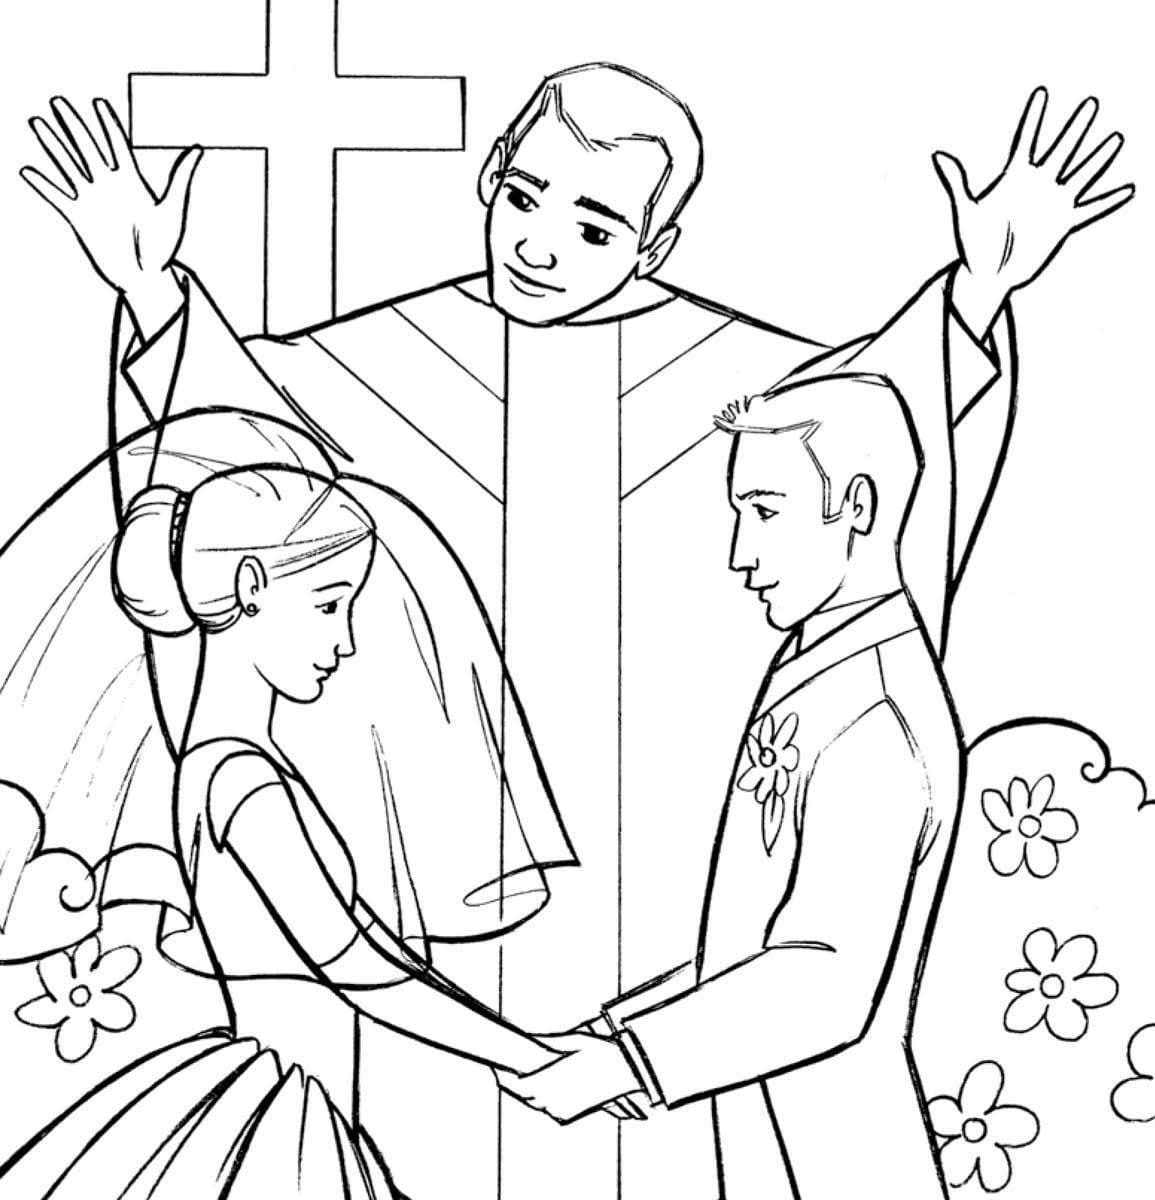 sacrament-of-marriage-coloring-page-free-printable-coloring-pages-for